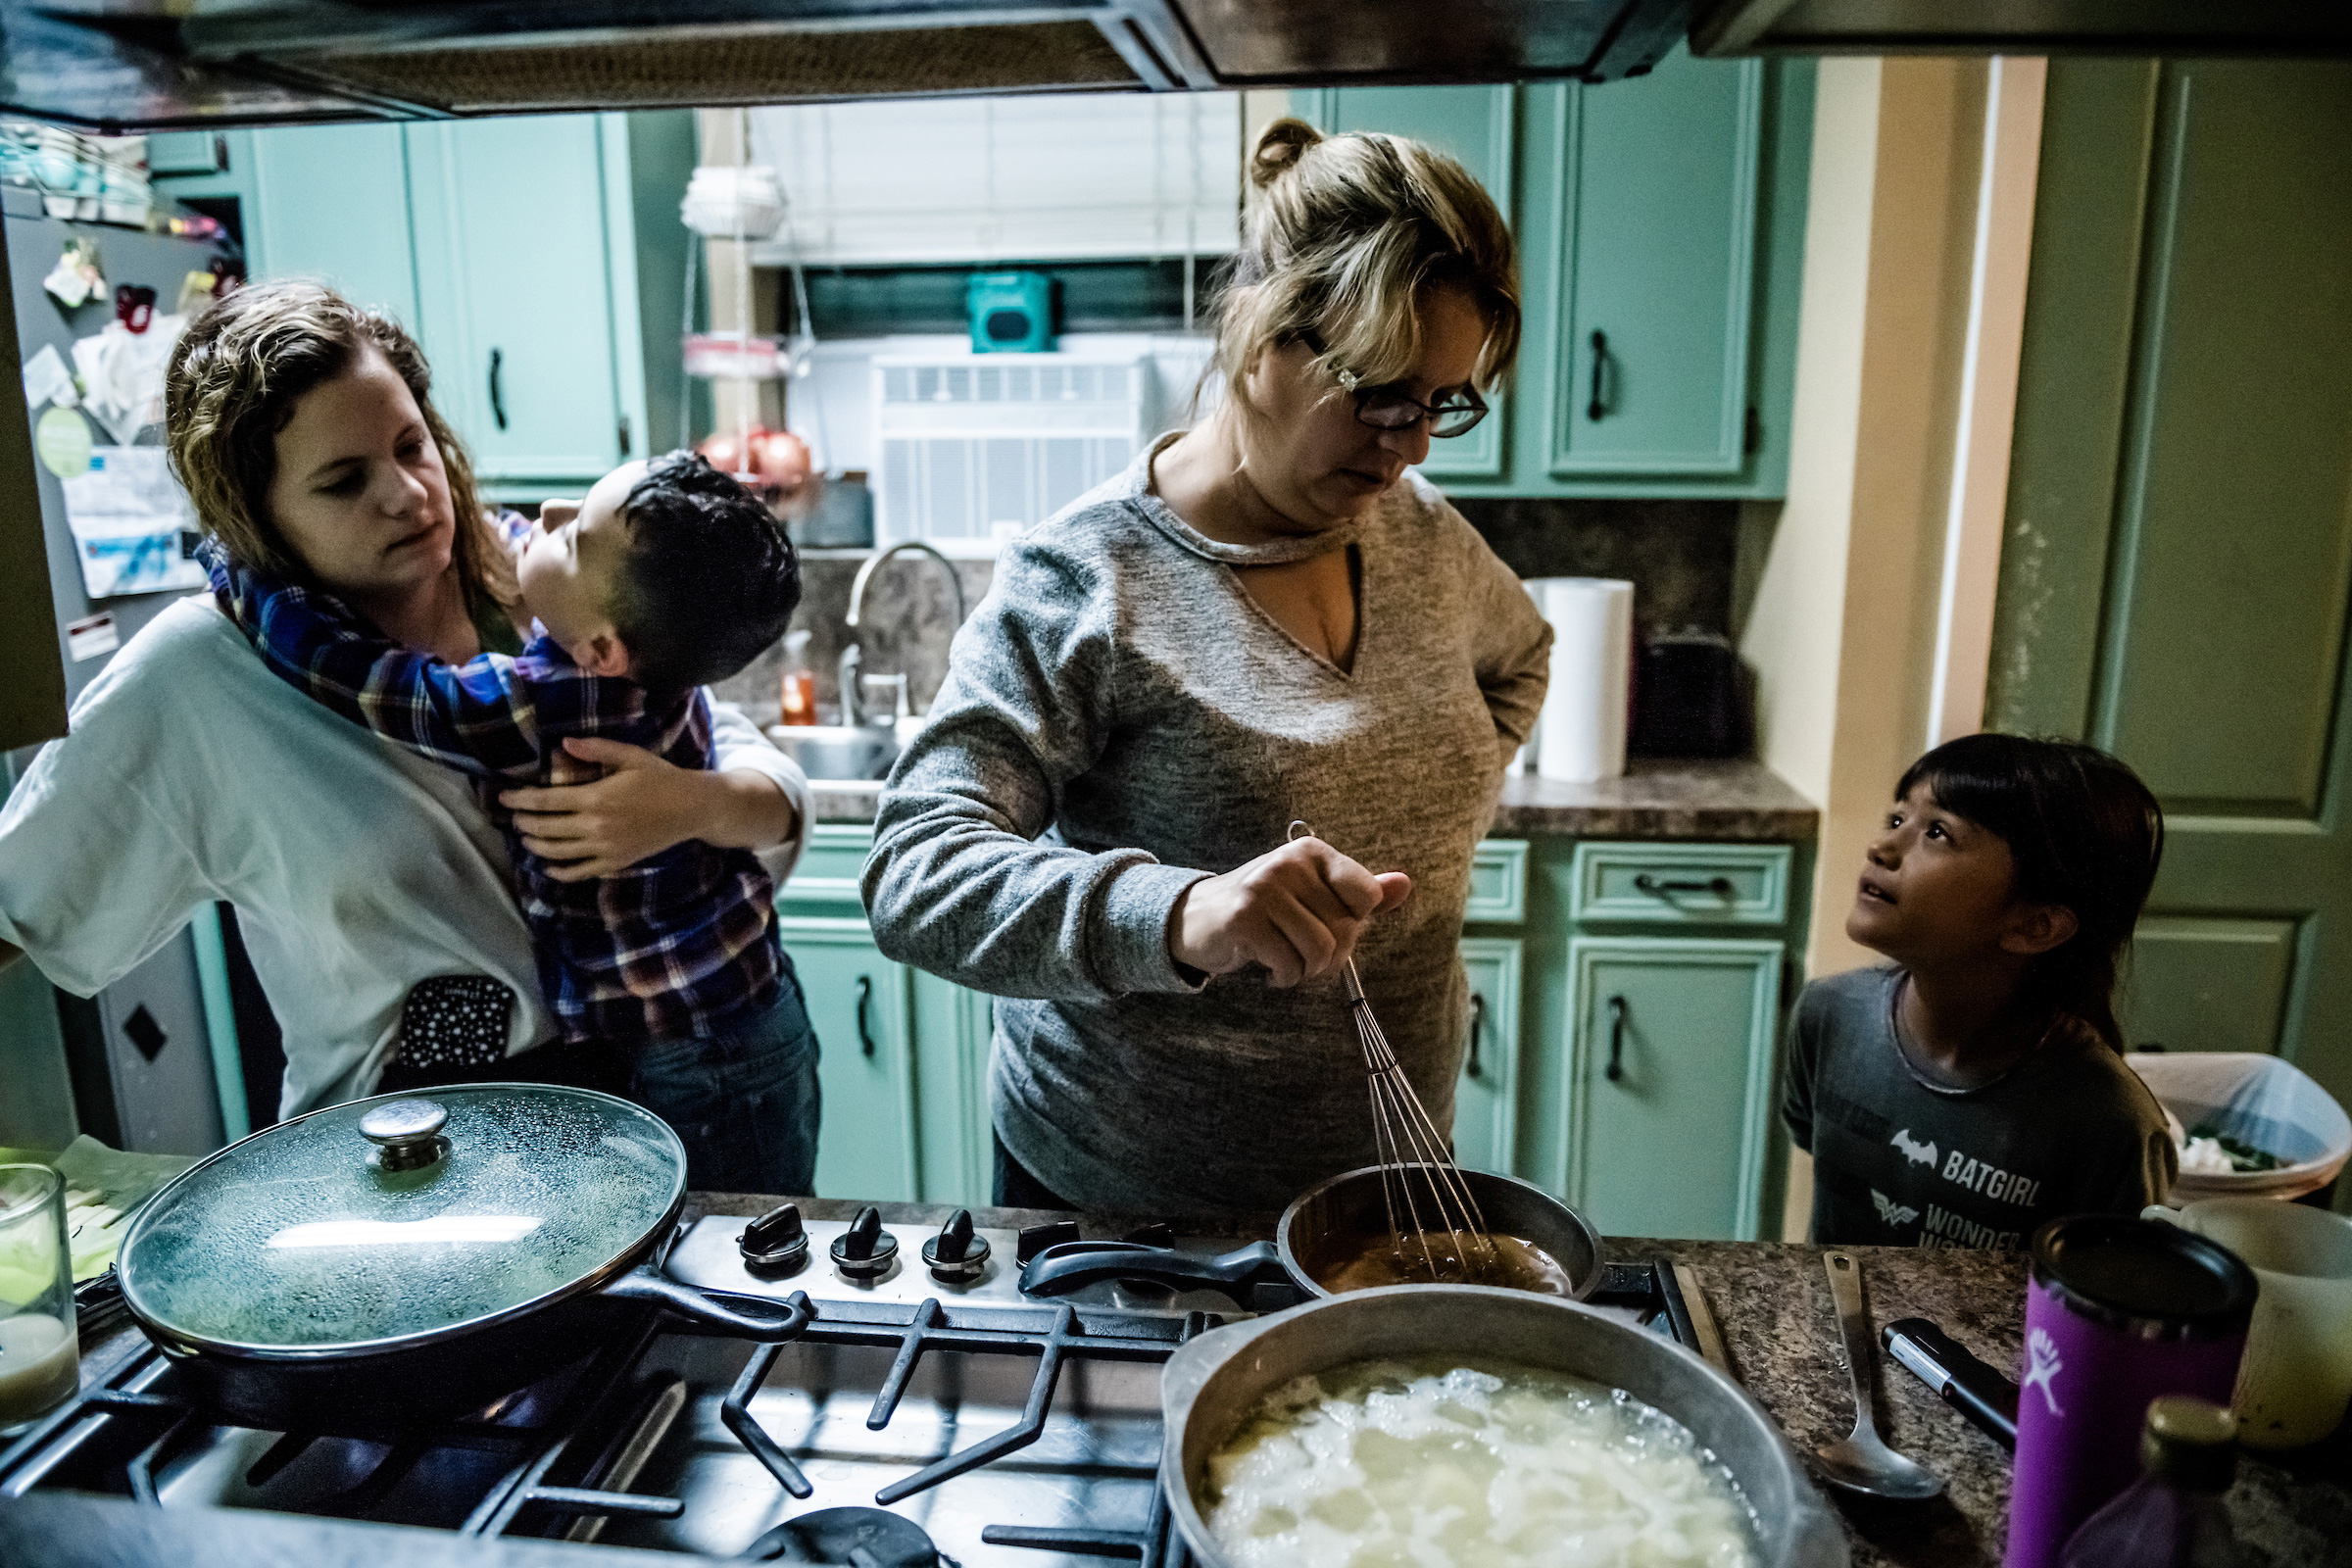 Jessica Higginbotham, second from right, is thankful she was able to cook dinner for her five children on Nov. 17, 2020. She survived heart and kidney transplants in 2019; she and three other members of her family had COVID-19 this year. The health issues, paired with her husband Jeremiah’s losing hours at work, cost the Baytown, Texas, family most of their life savings. (Meridith Kohut for TIME)